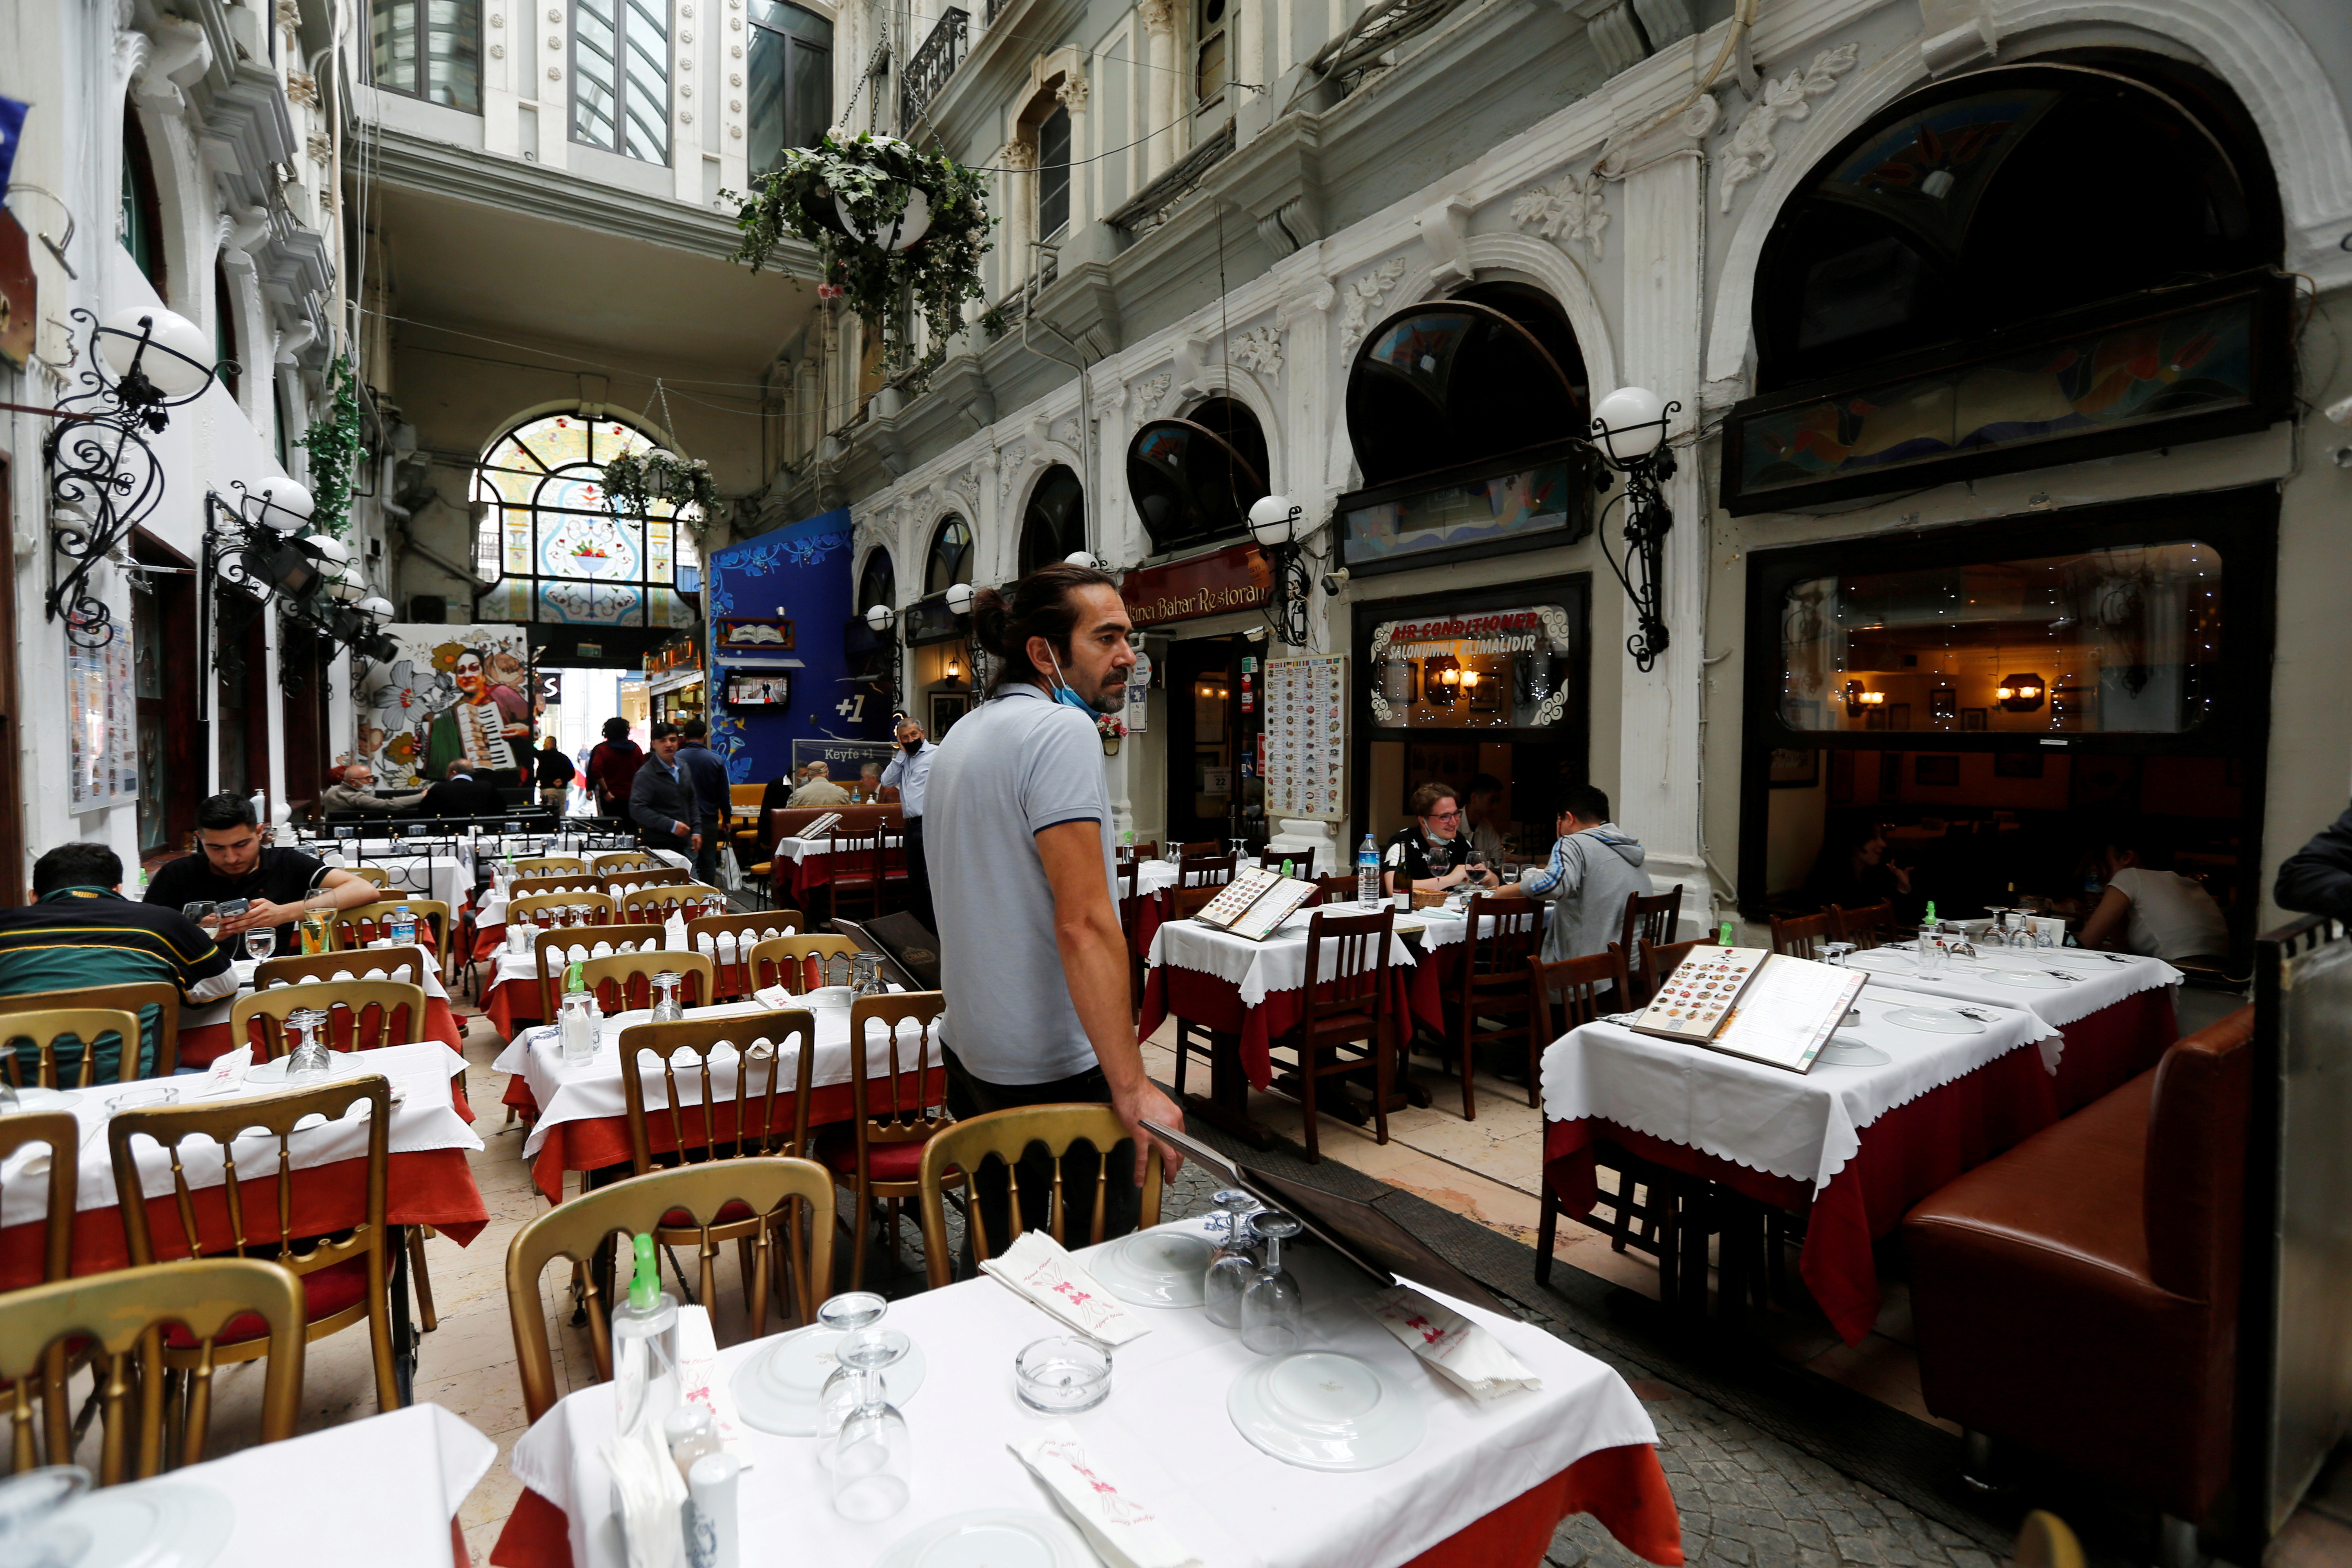 COVID-19 restrictions on restaurants and cafes are eased in Istanbul